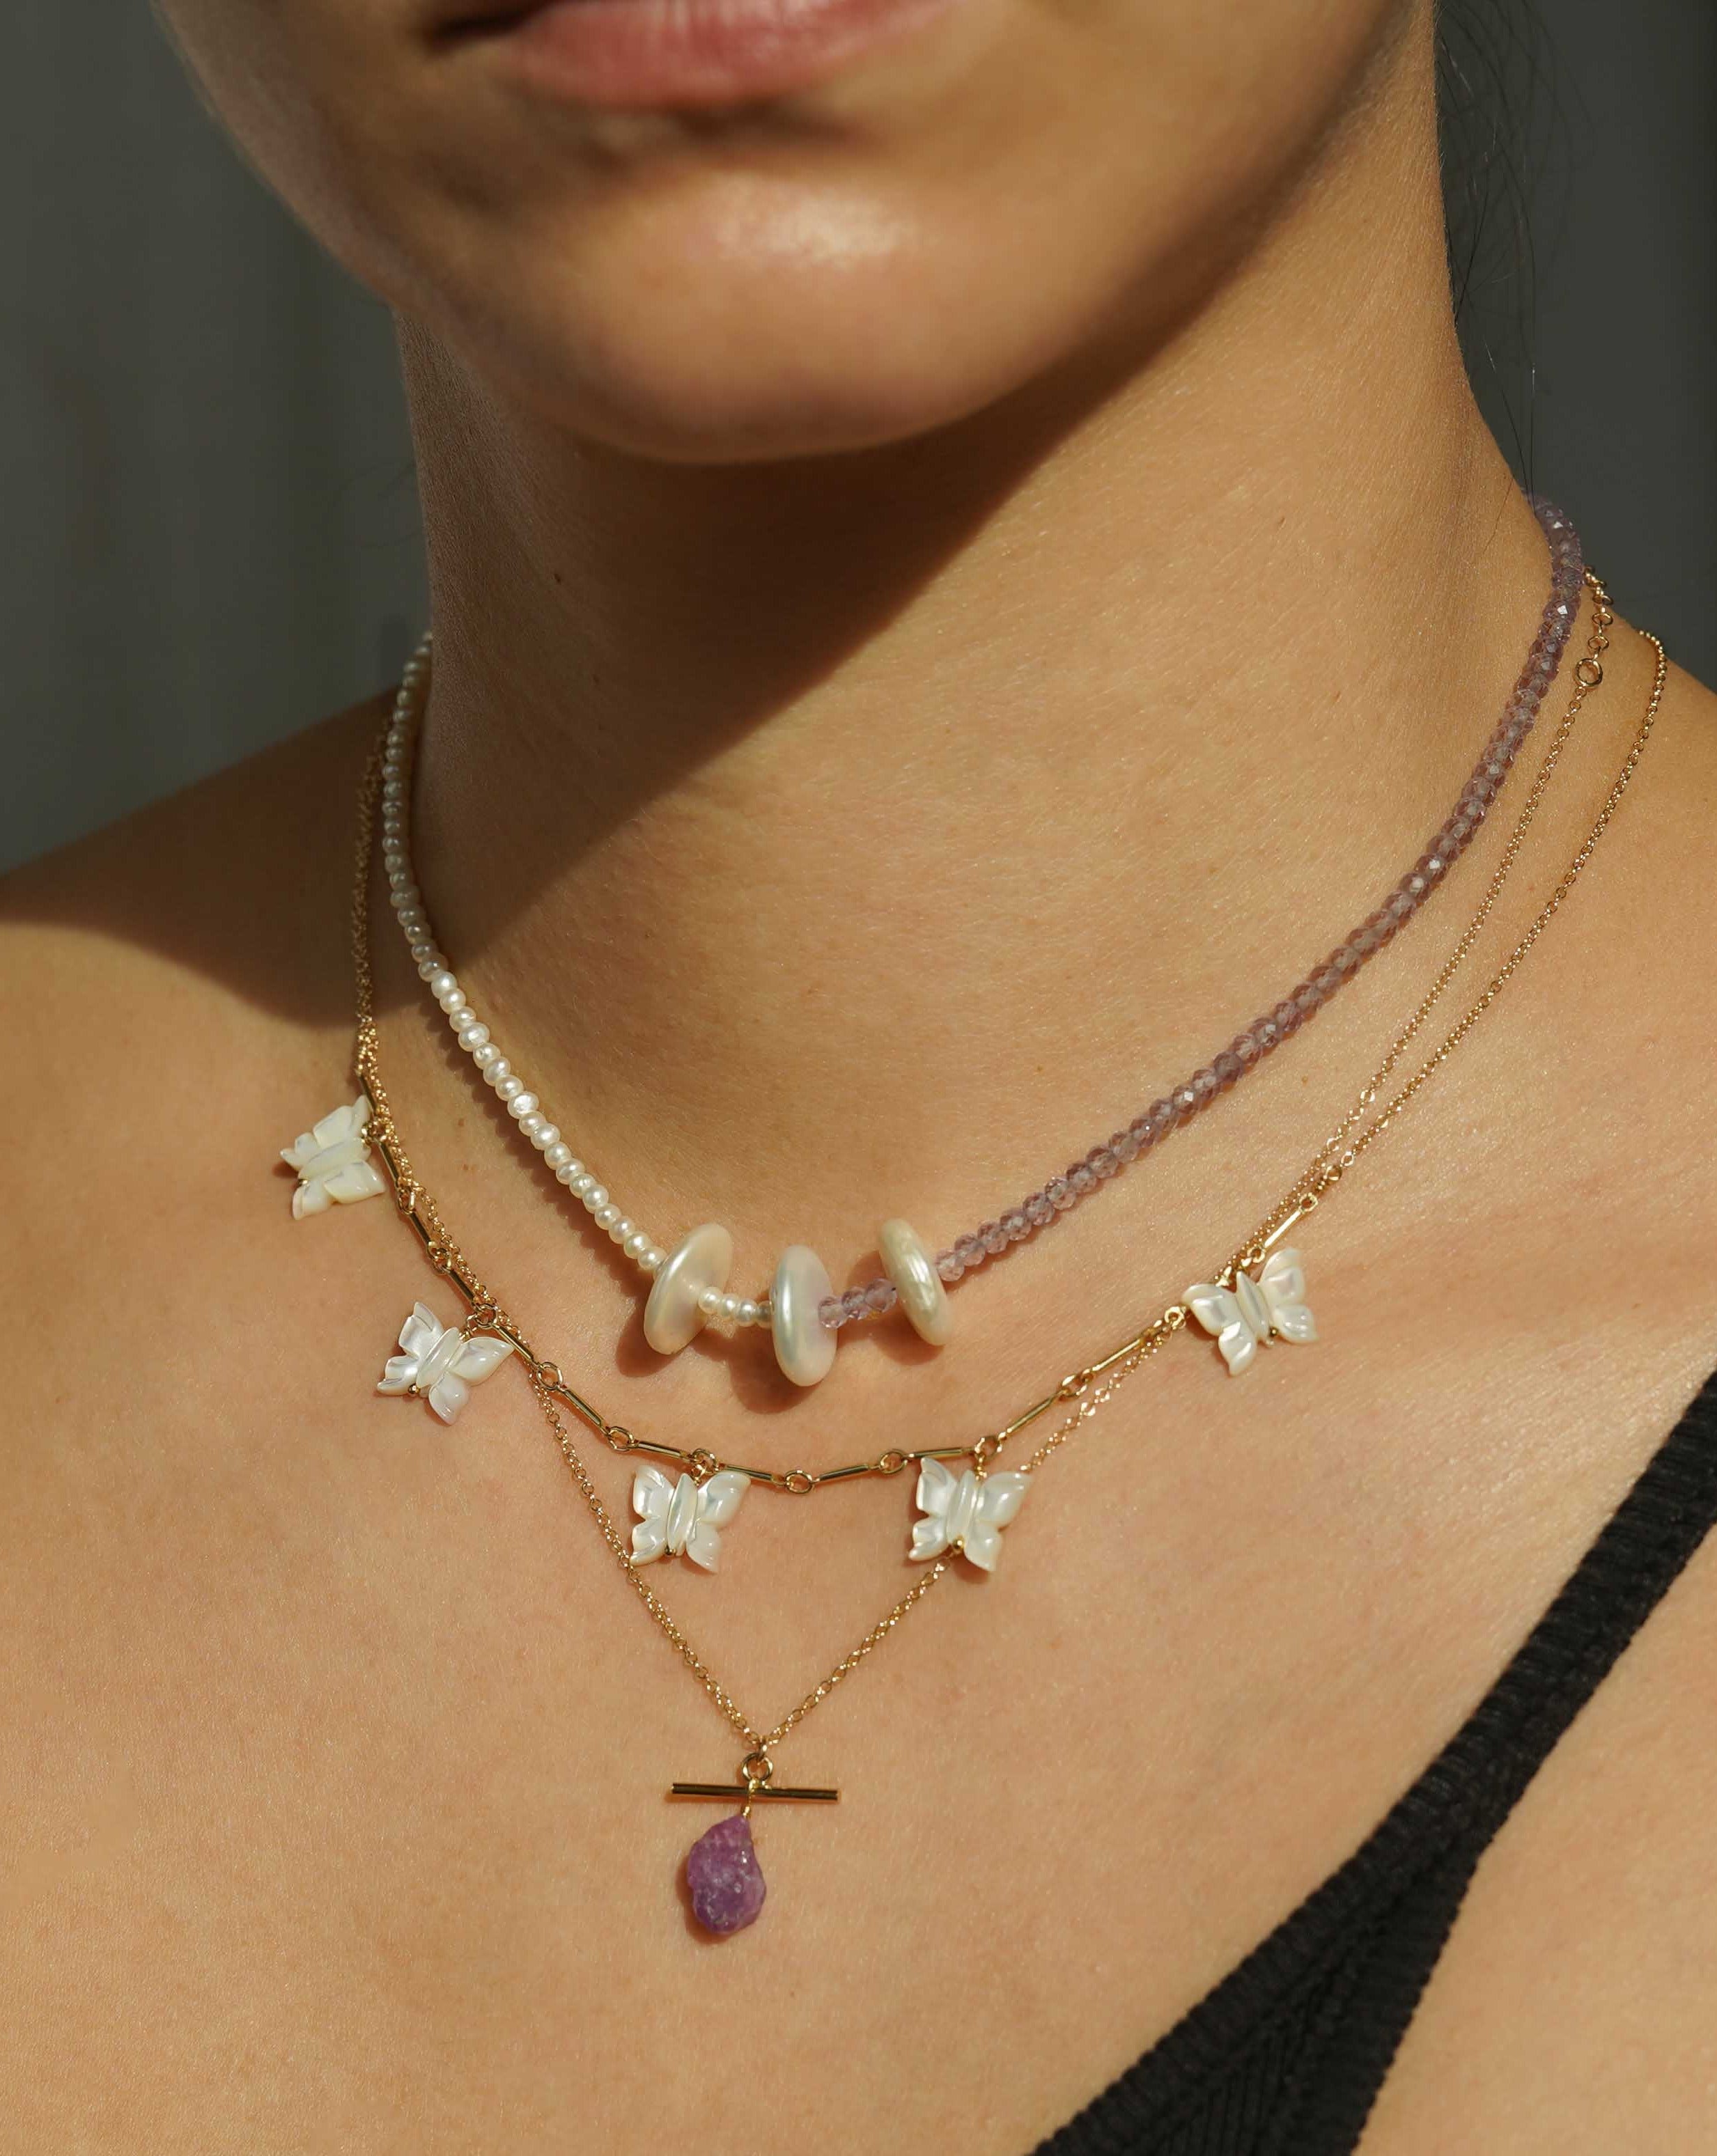 Fallon Necklace by KOZAKH. A 16 to 18 inch adjustable length, bar link chain necklace in 14K Gold Filled, featuring hand-carved Mother of Pearl butterfly charms. 